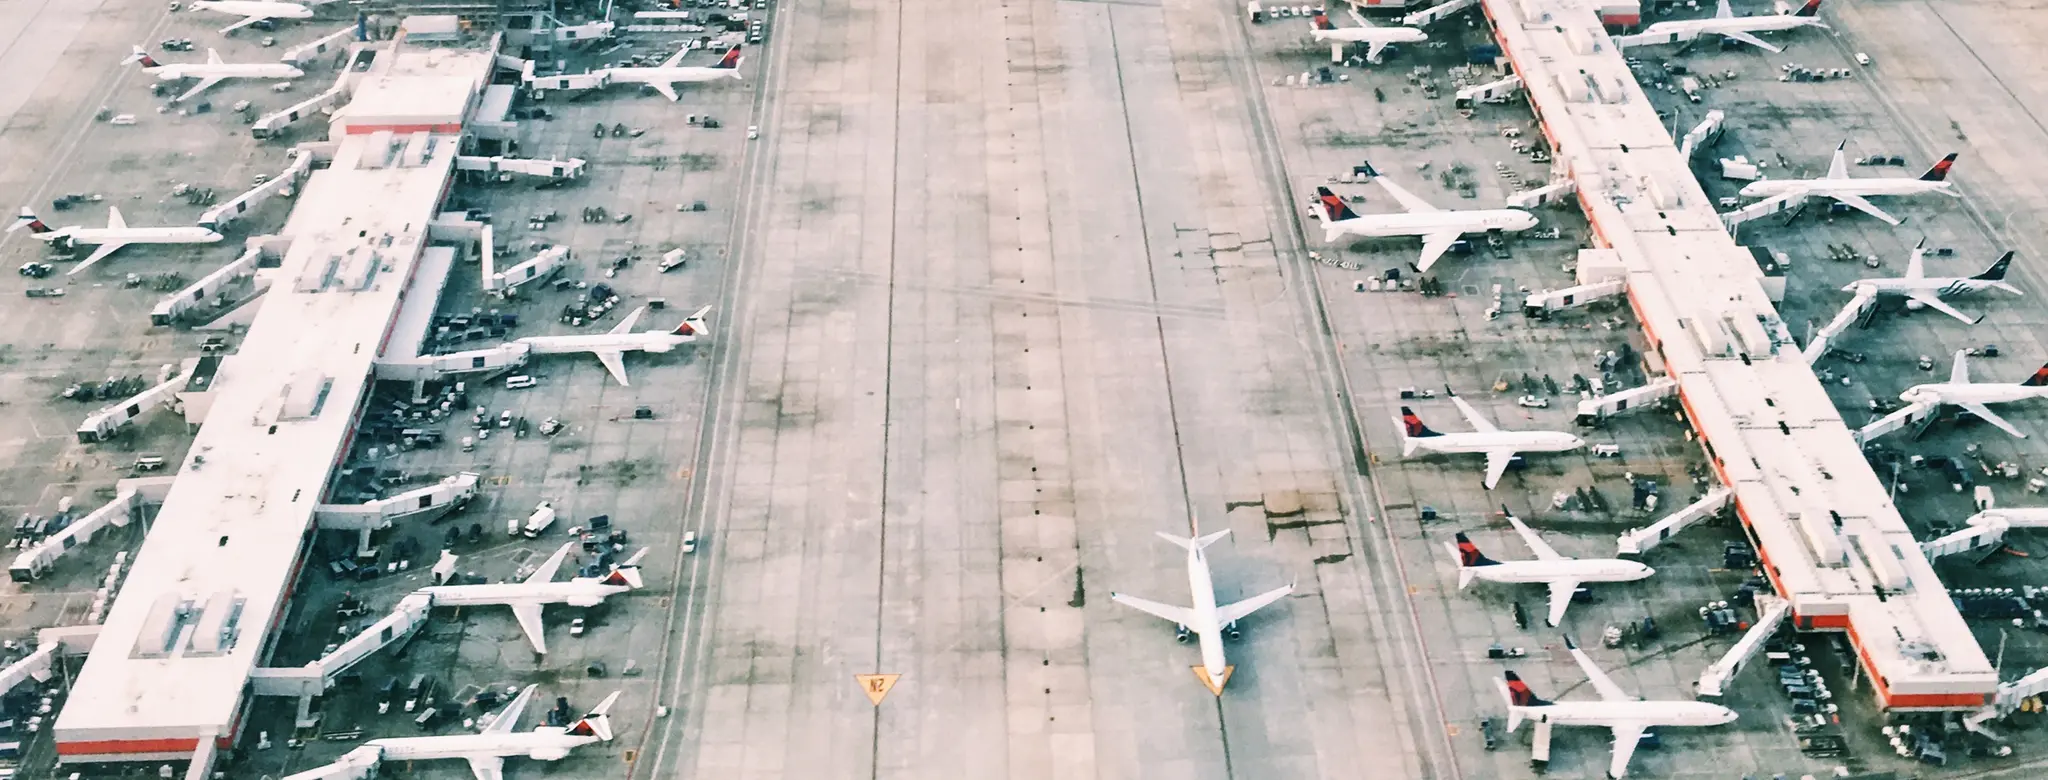 Planes lines up on the tarmac